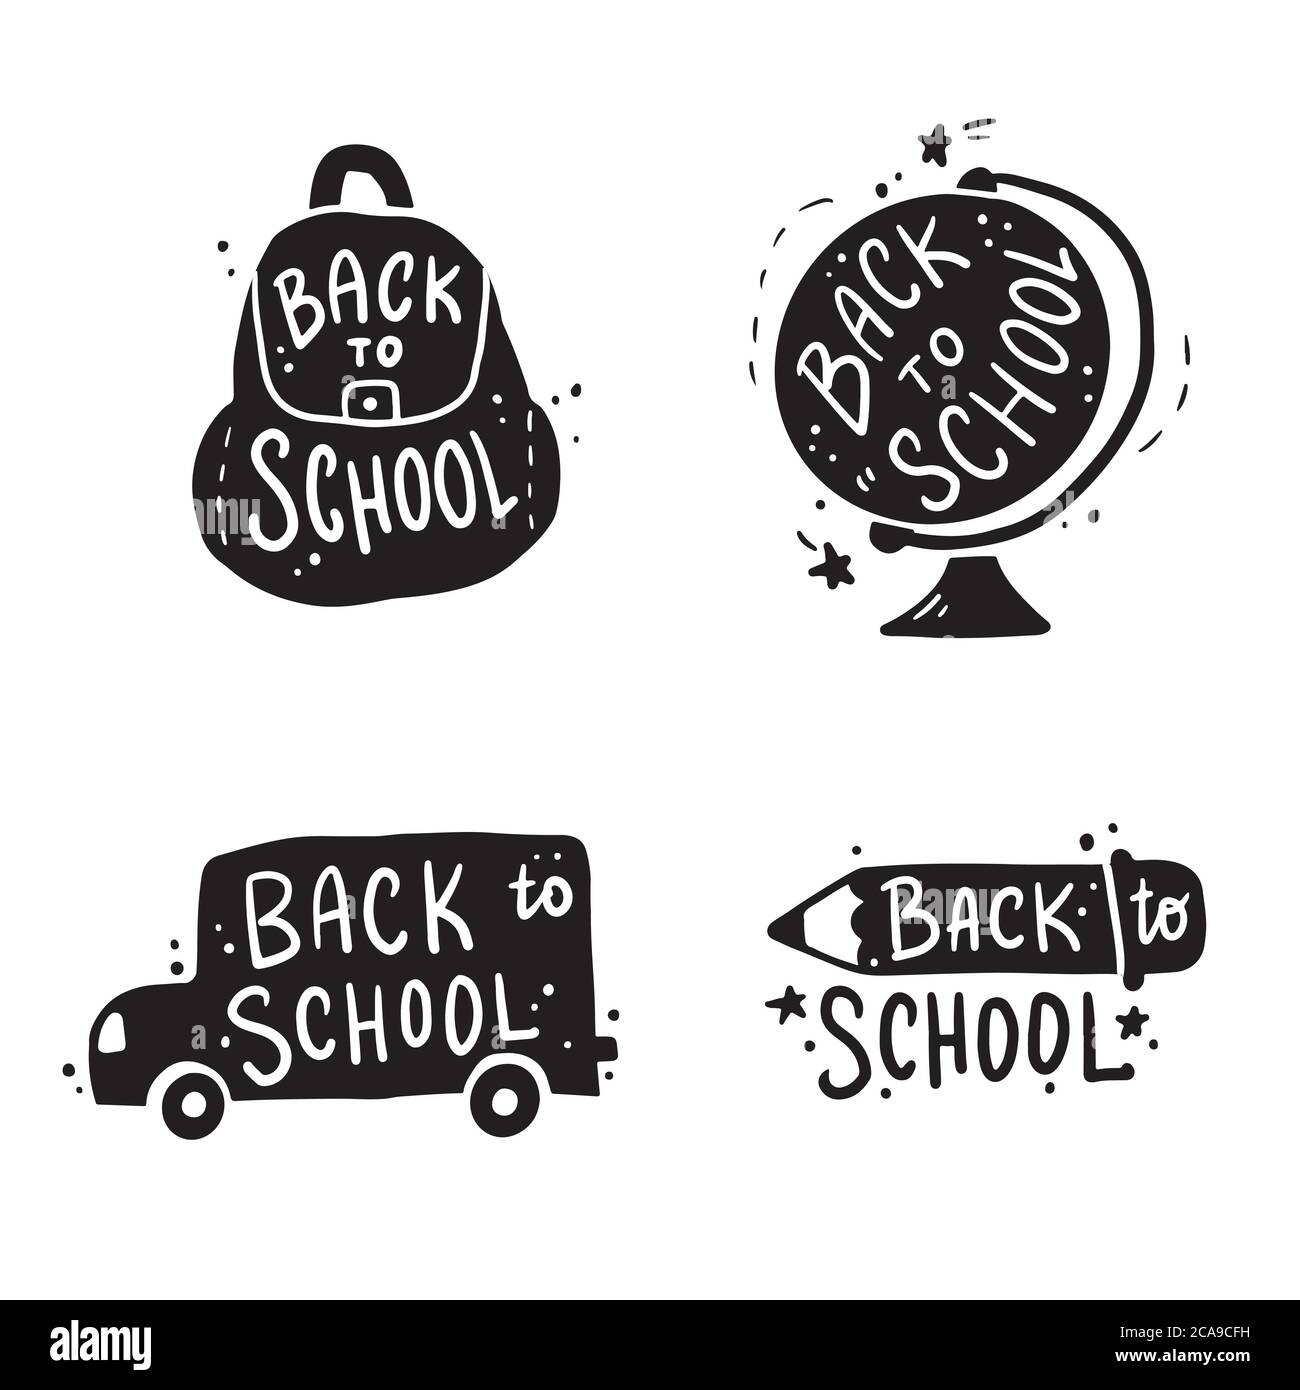 Cute hand drawn lettering Back to school quote by doodle sketch style. Vector illustration slogan for kids poster, children banner for school or education. Stock Vector